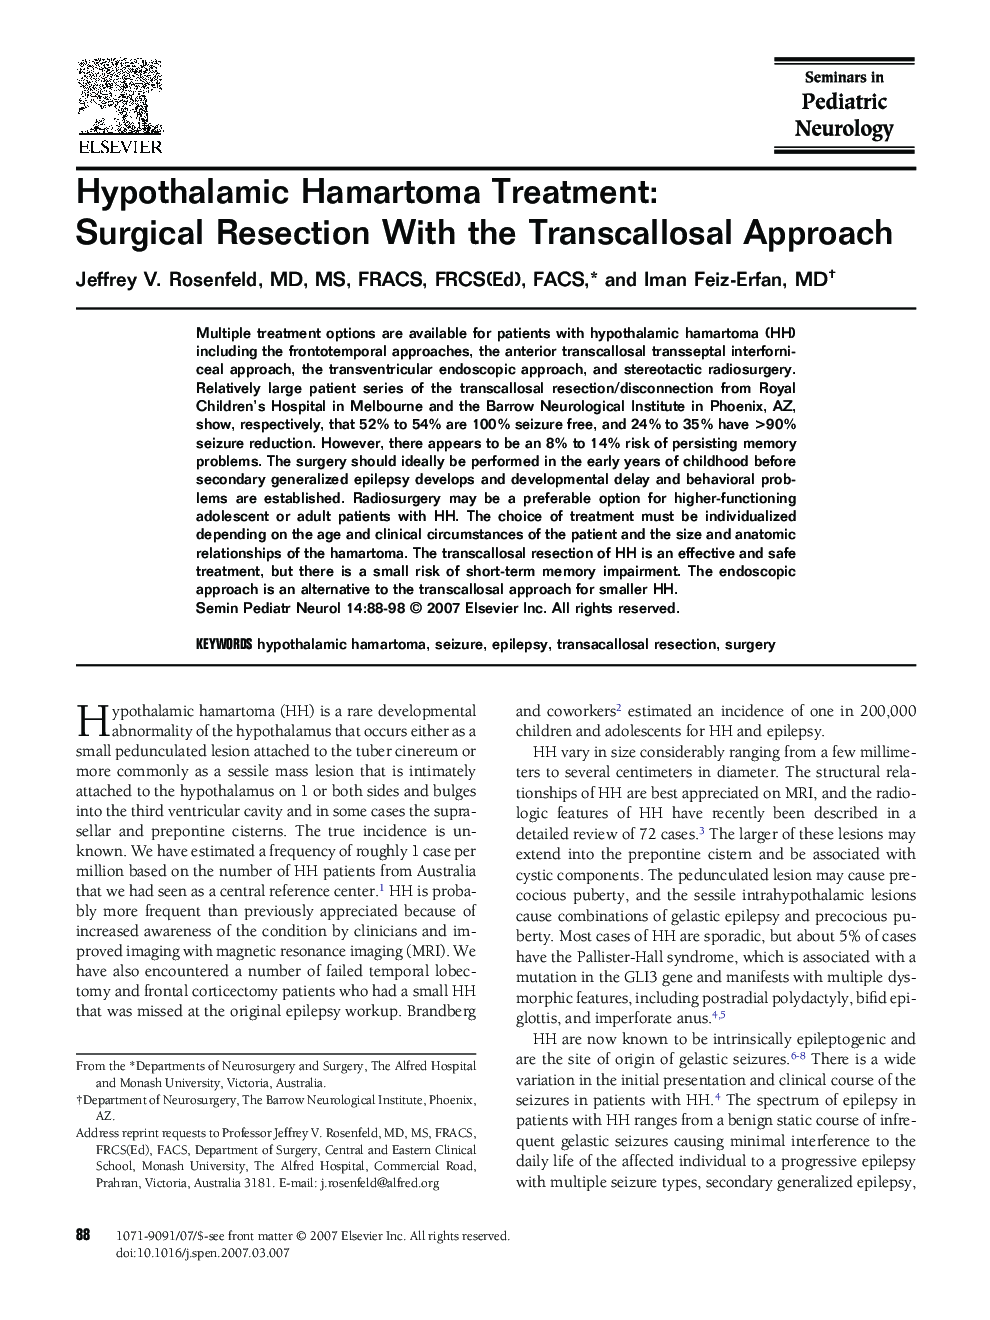 Hypothalamic Hamartoma Treatment: Surgical Resection With the Transcallosal Approach